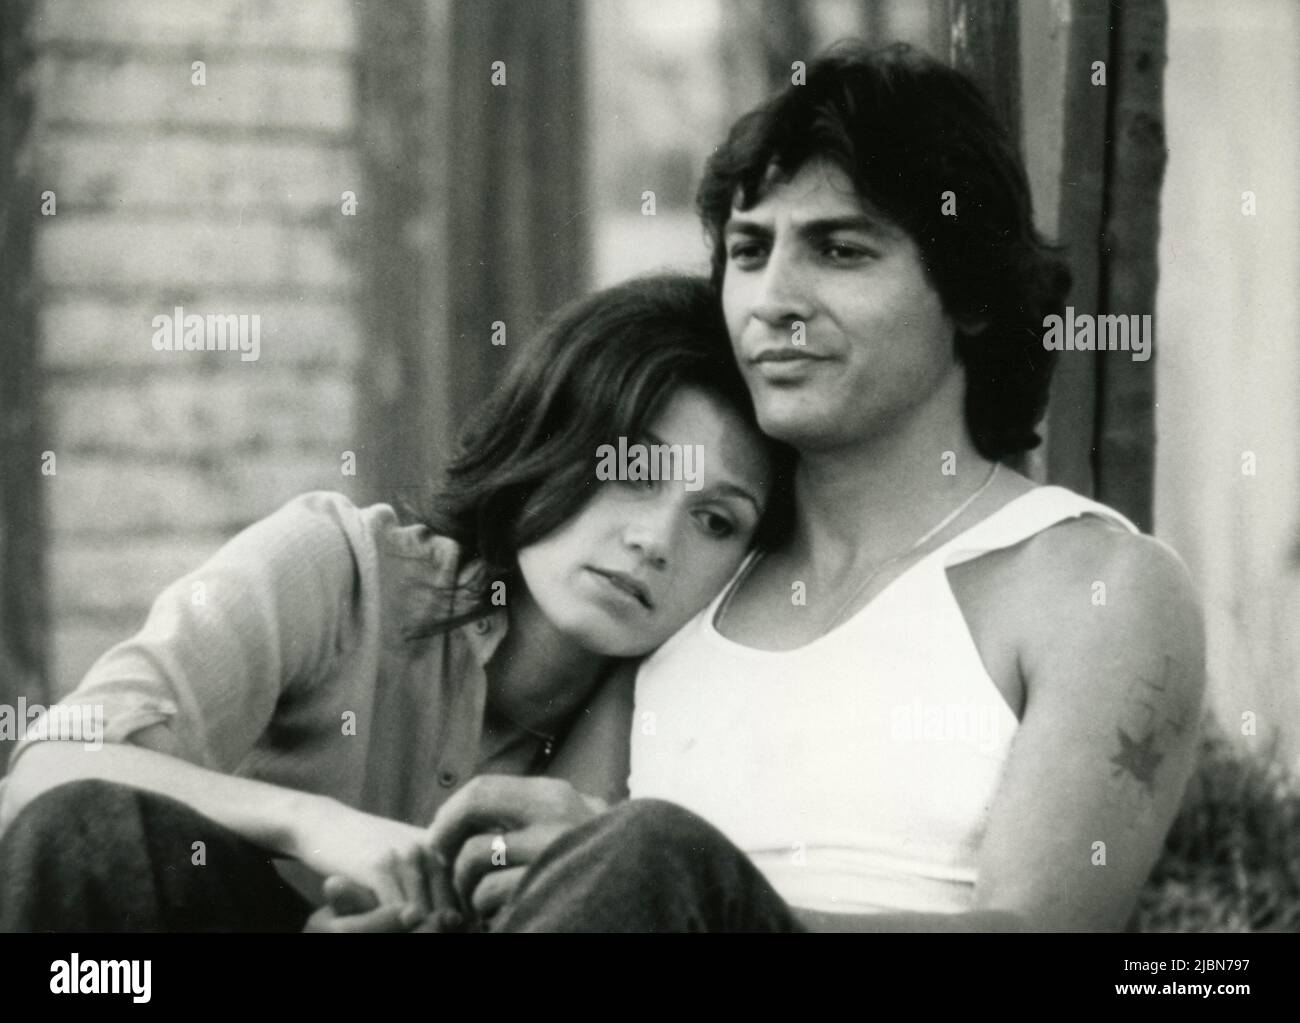 Actors Richard Yniguez and Marta DuBois in the movie Boulevard Nights, USA 1979 Stock Photo